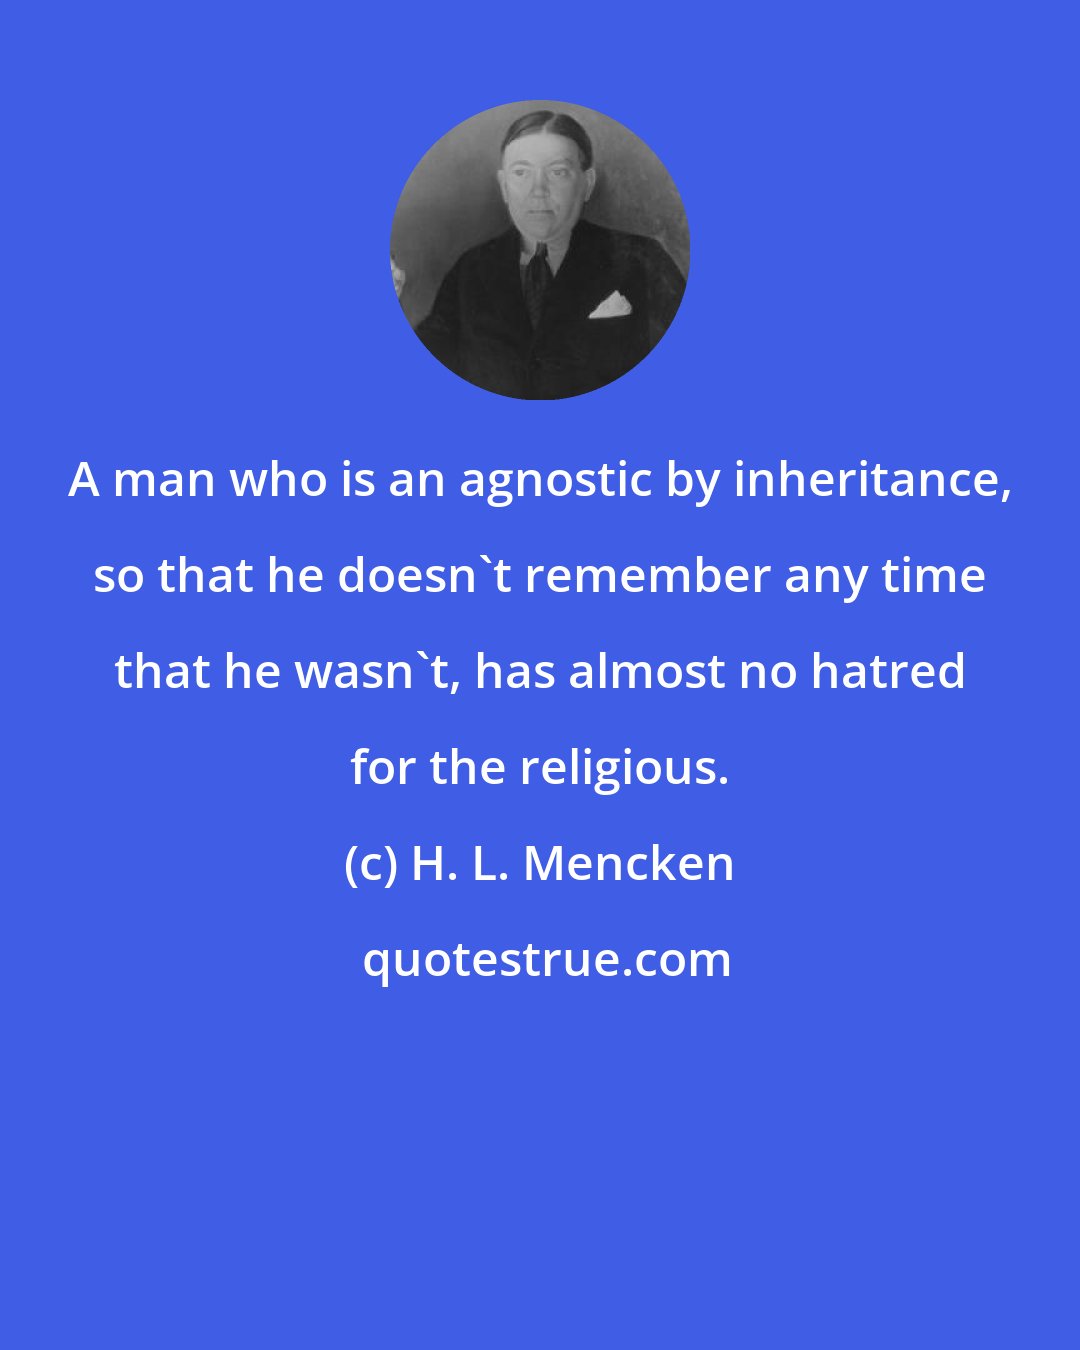 H. L. Mencken: A man who is an agnostic by inheritance, so that he doesn't remember any time that he wasn't, has almost no hatred for the religious.